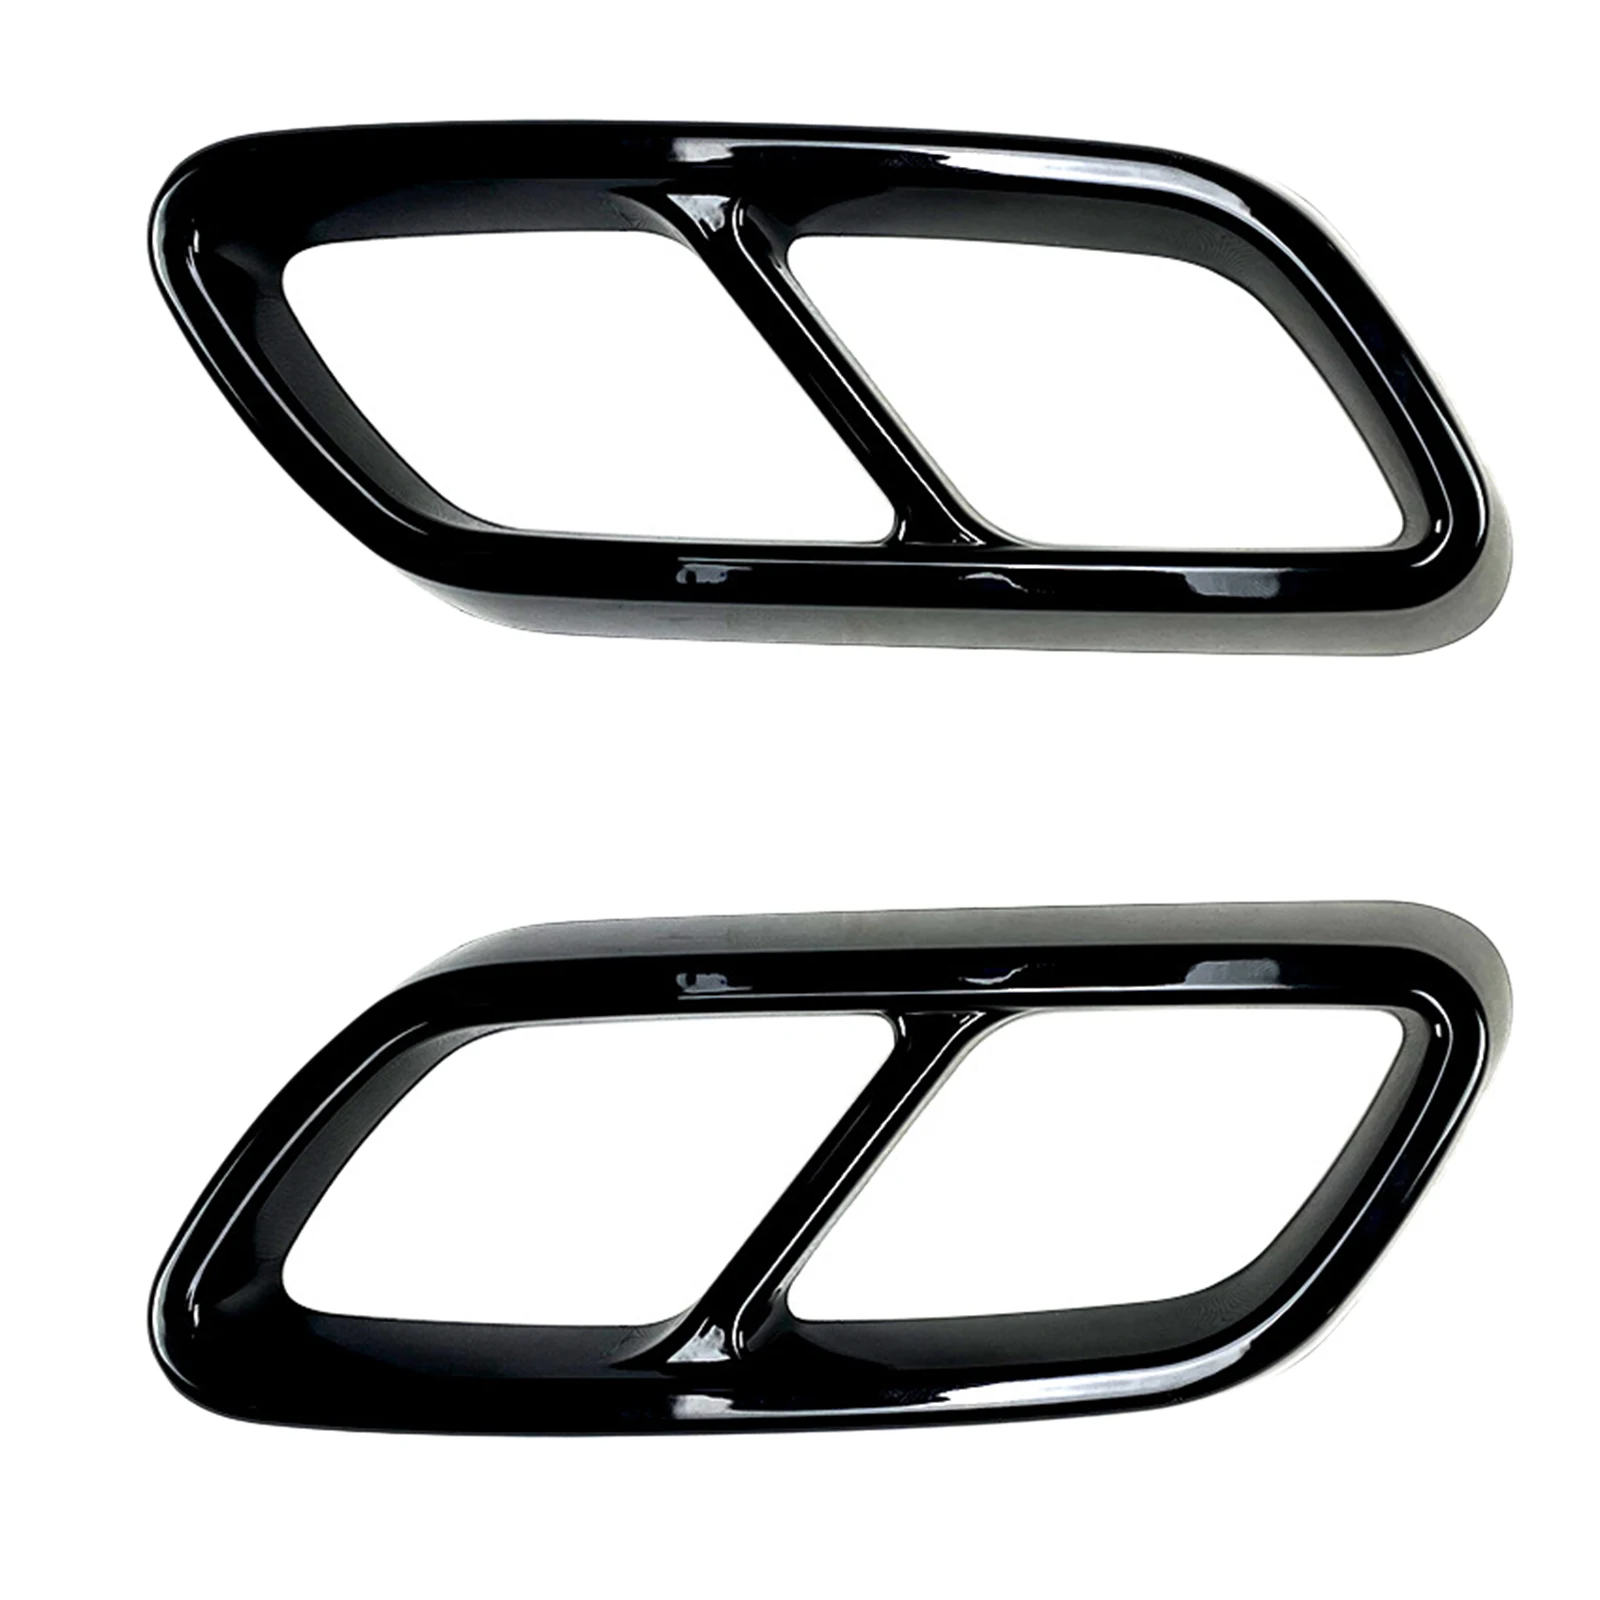 2Piece Exhaust Pipe Cover Trim Muffler Durable for x253 2015-2018 C GLC